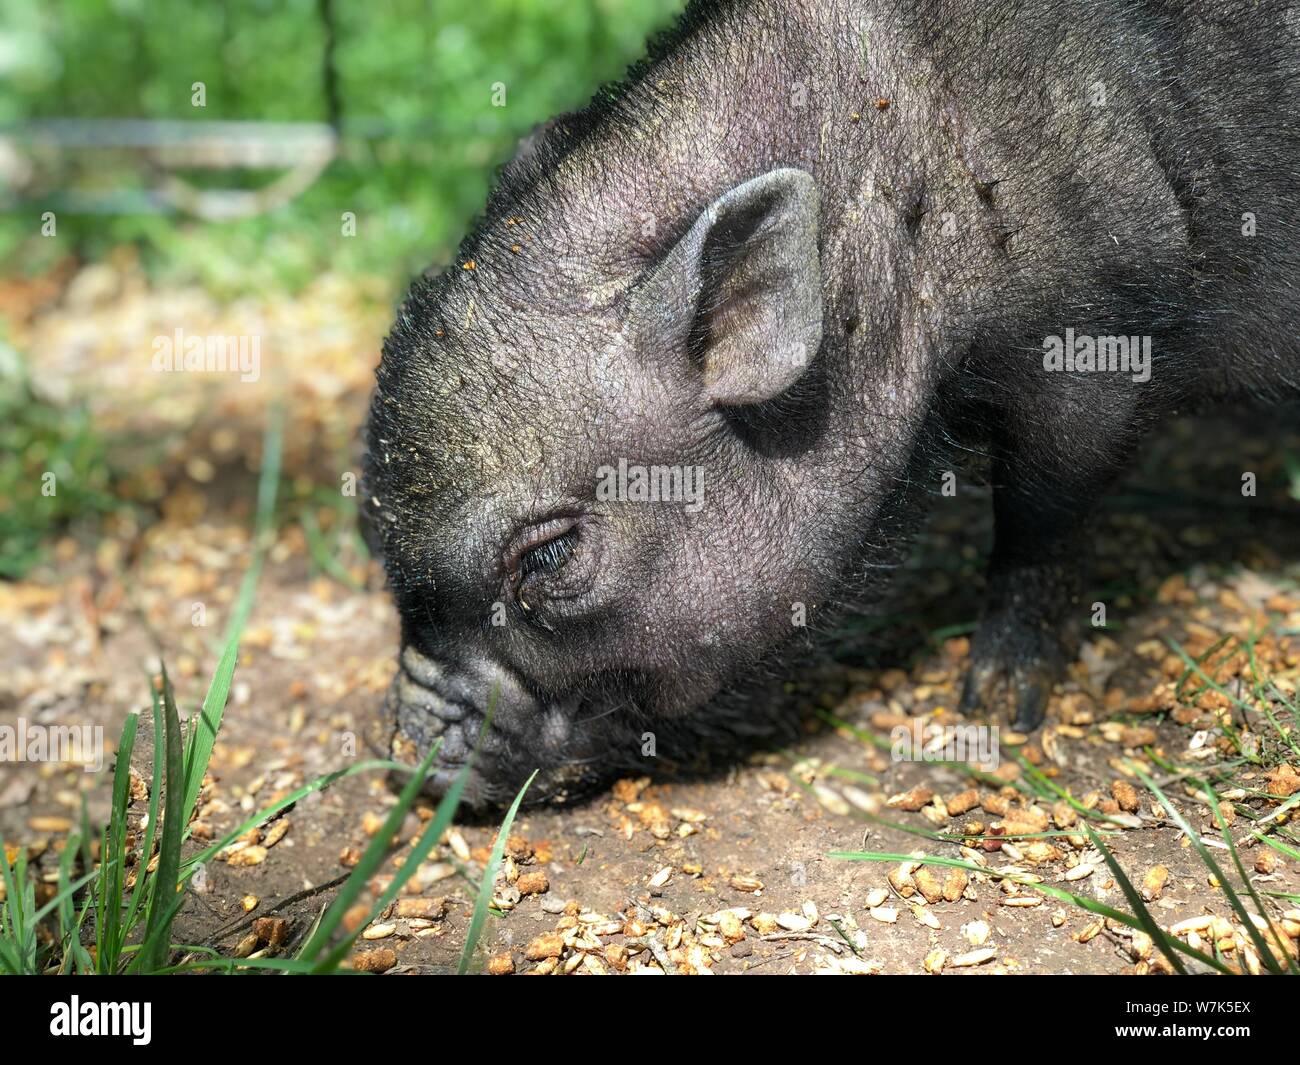 Baby pig eating outside small animal portrait Stock Photo